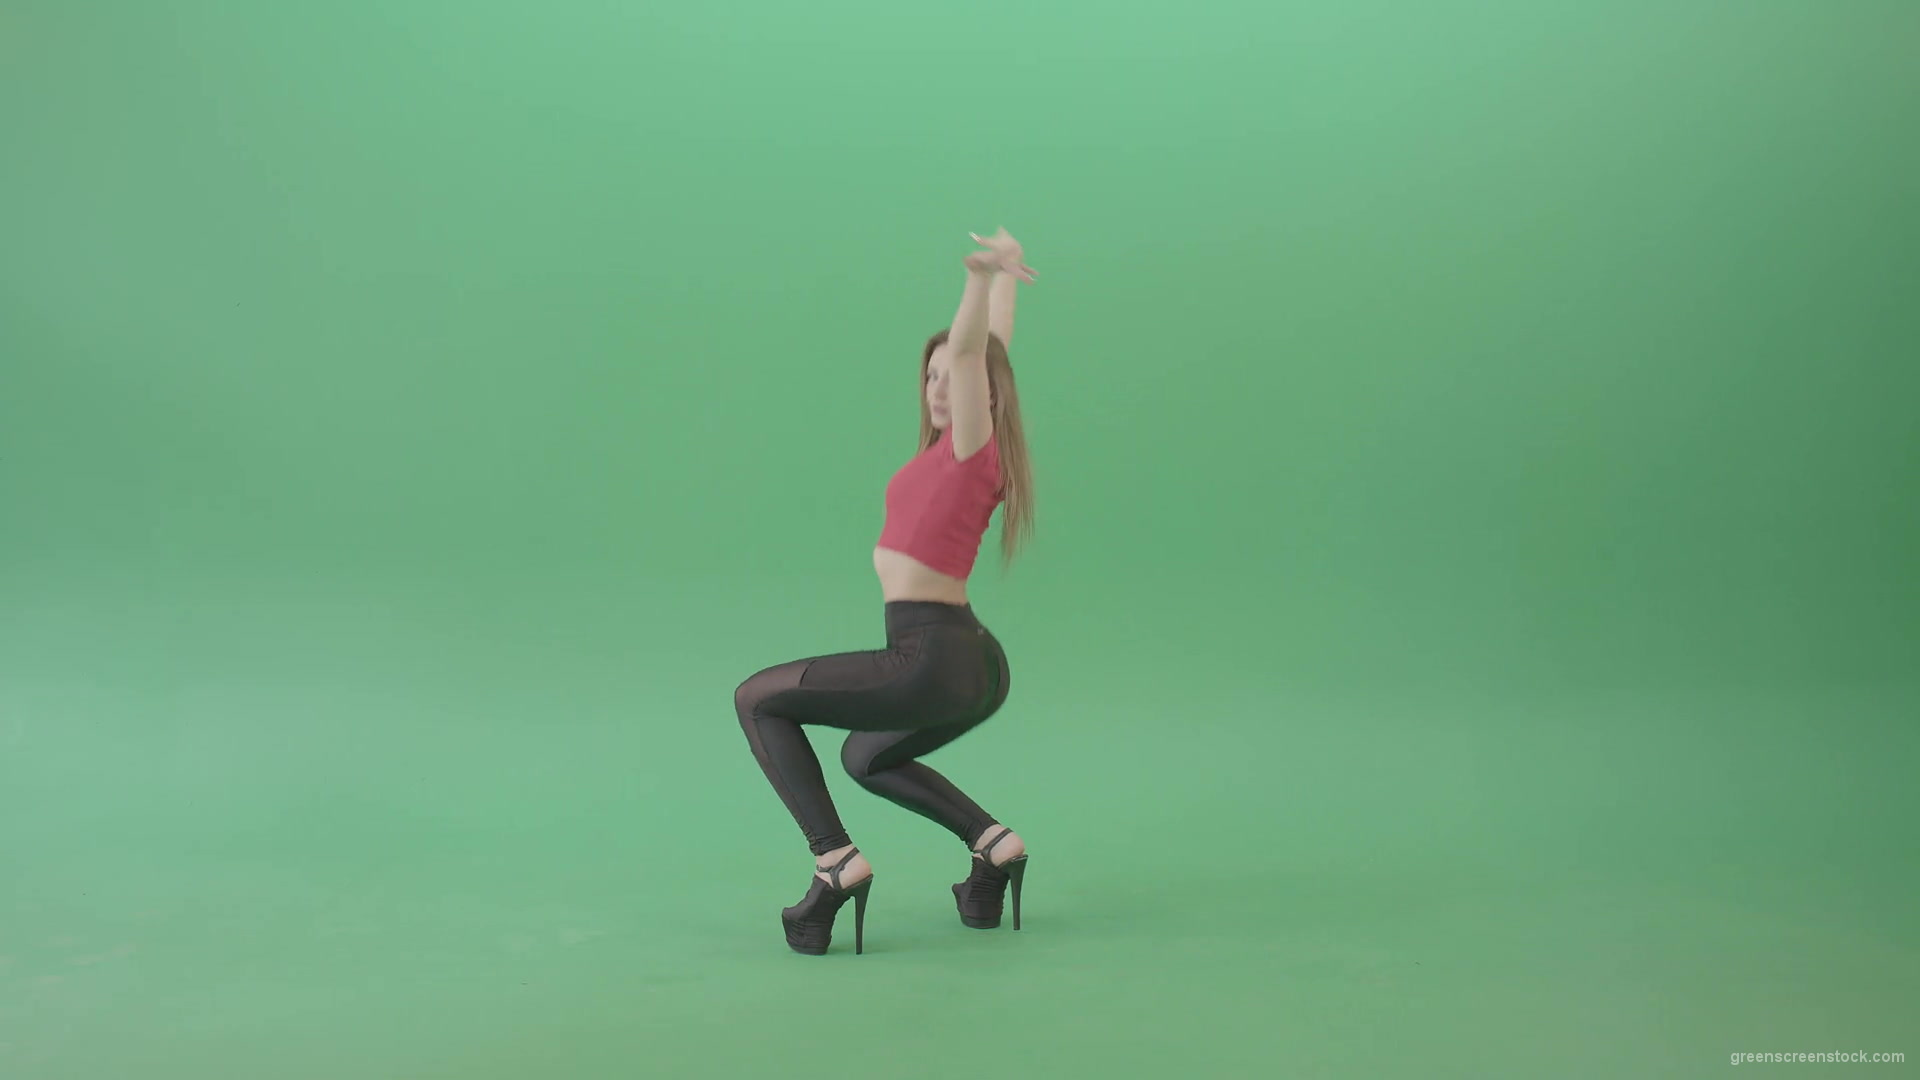 Young-woman-making-squat-on-green-screen-dancing-sexy-moves-4K-Video-Footage-1920_002 Green Screen Stock